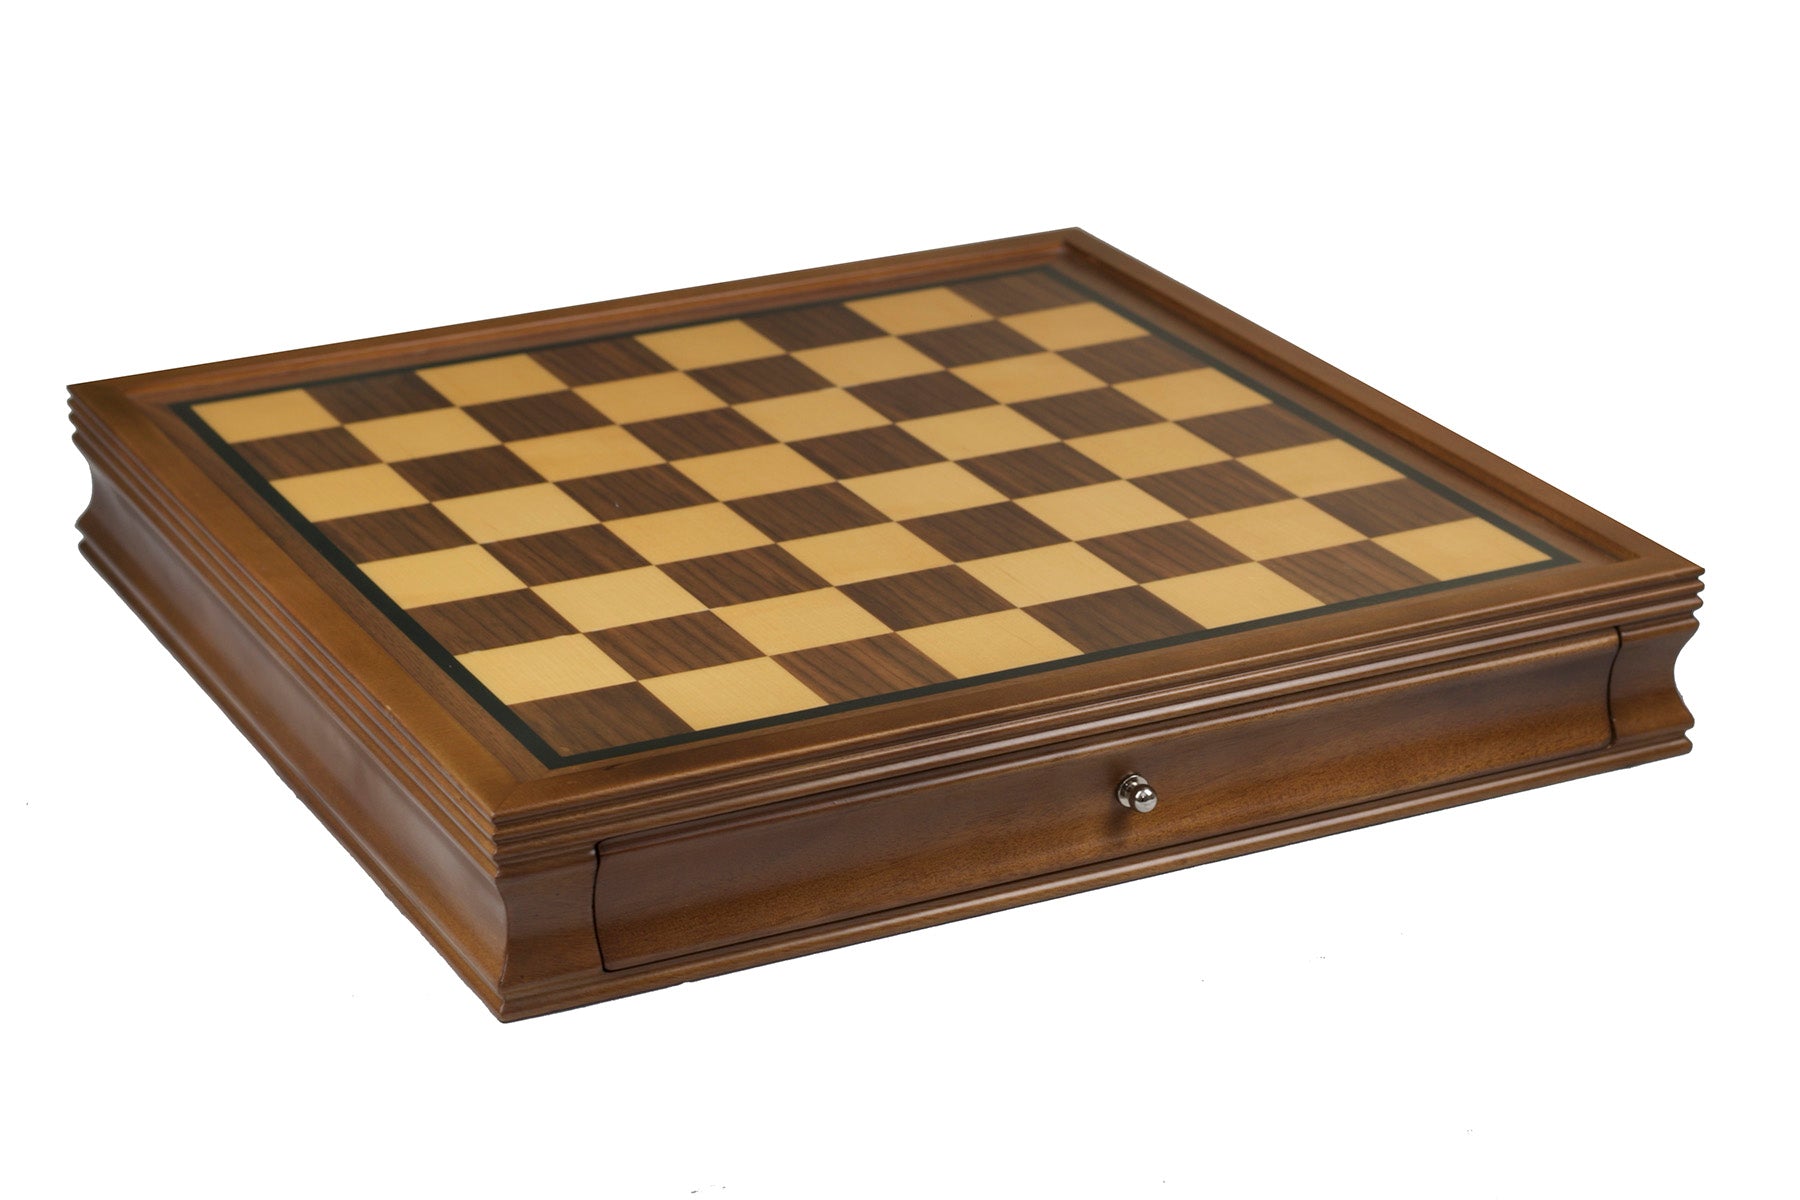 Wooden Chess Set – The ADKX Store